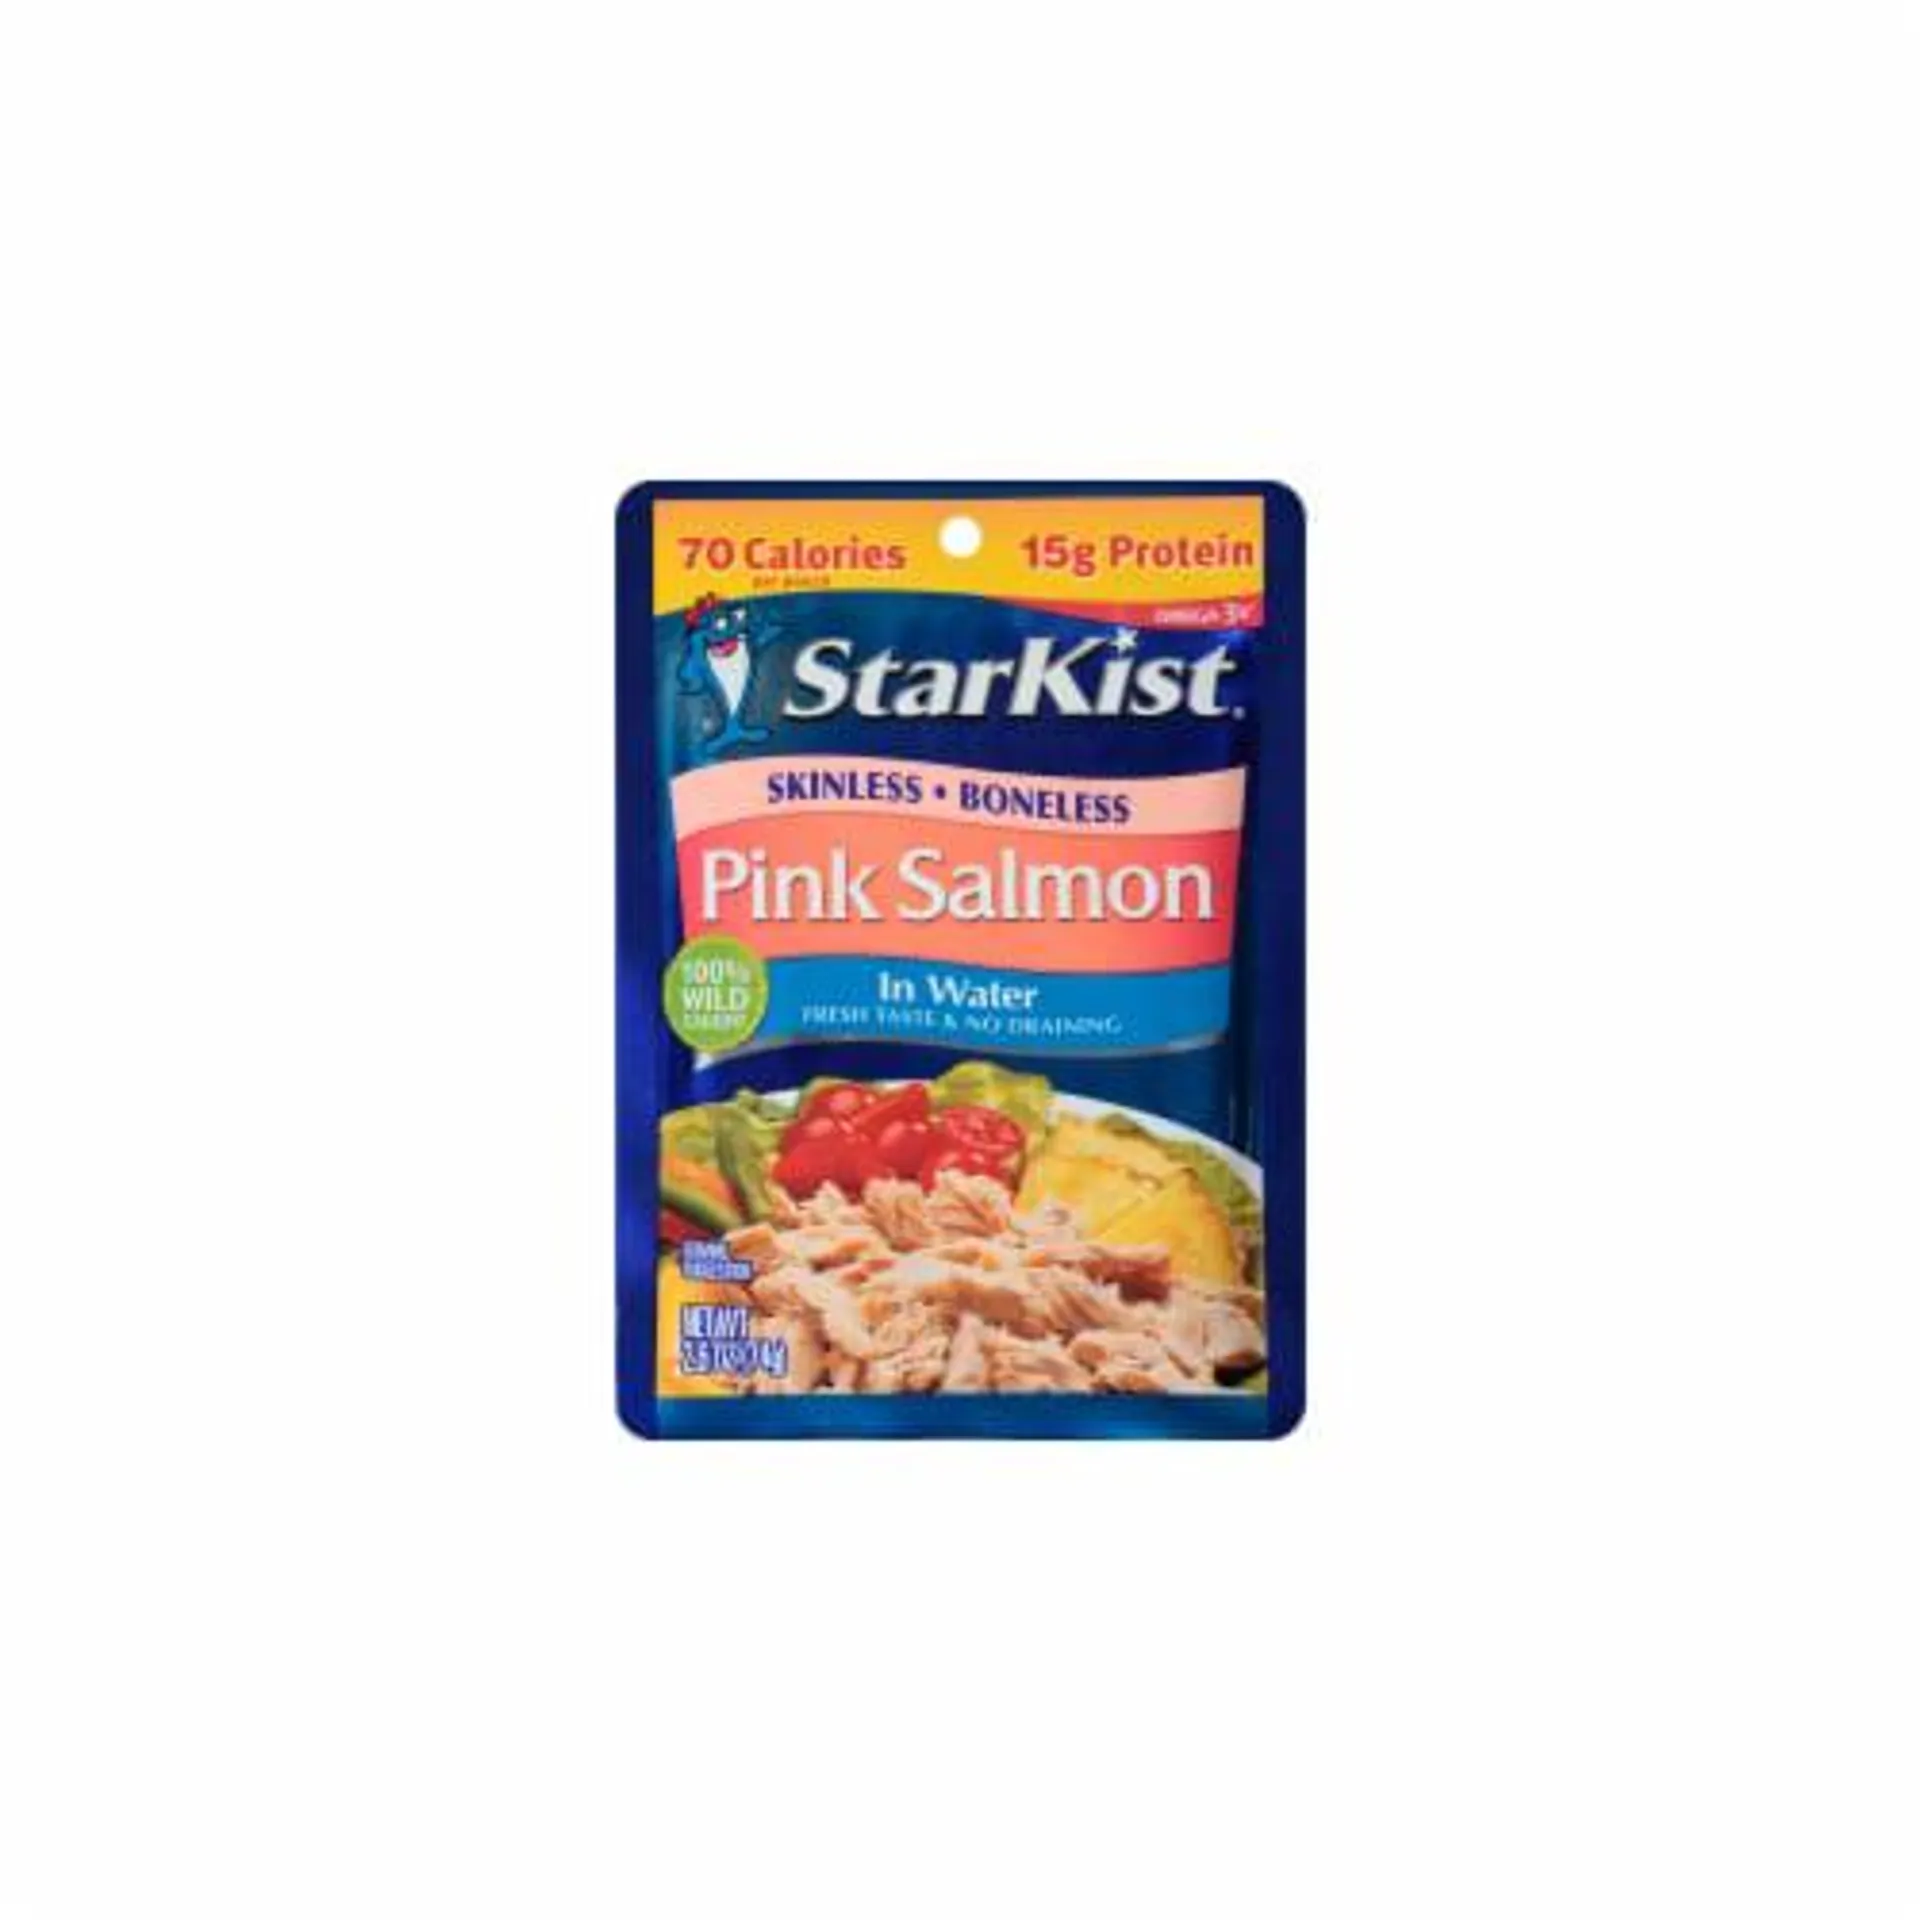 StarKist Skinless and Boneless Pink Salmon in Water, 2.6 Ounce (Pack of 10)